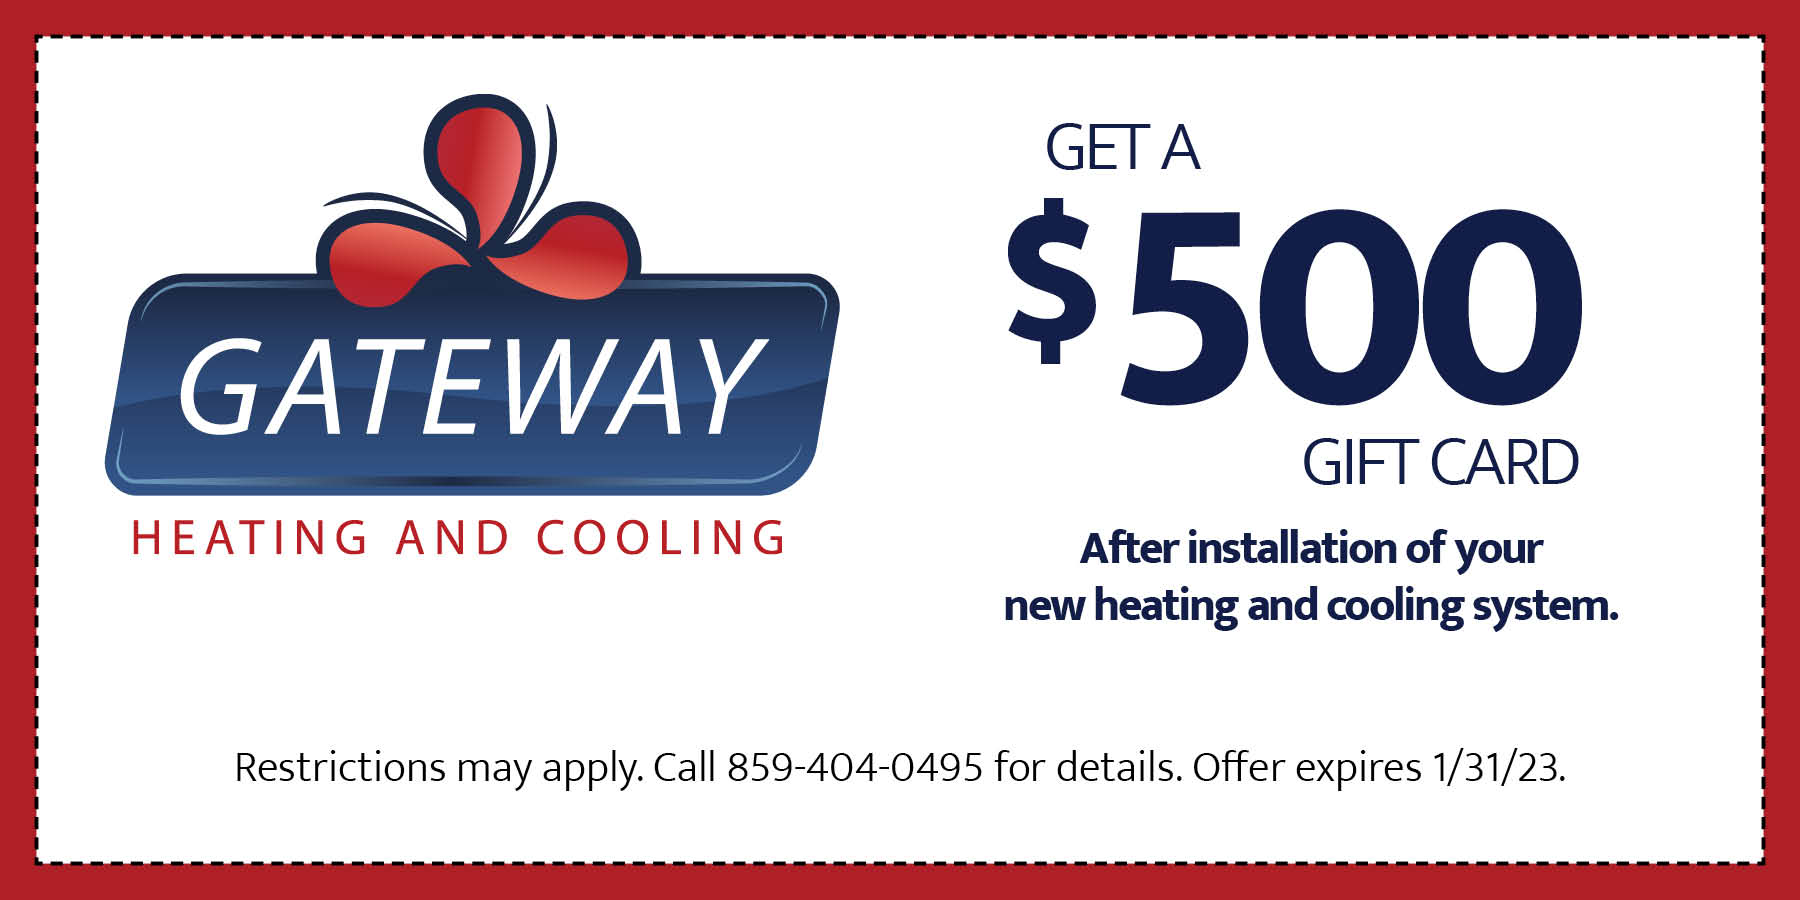 Get a 0 giftcard after installation. restrictions may apply. contact us for details. offer expires 1/31/2023.